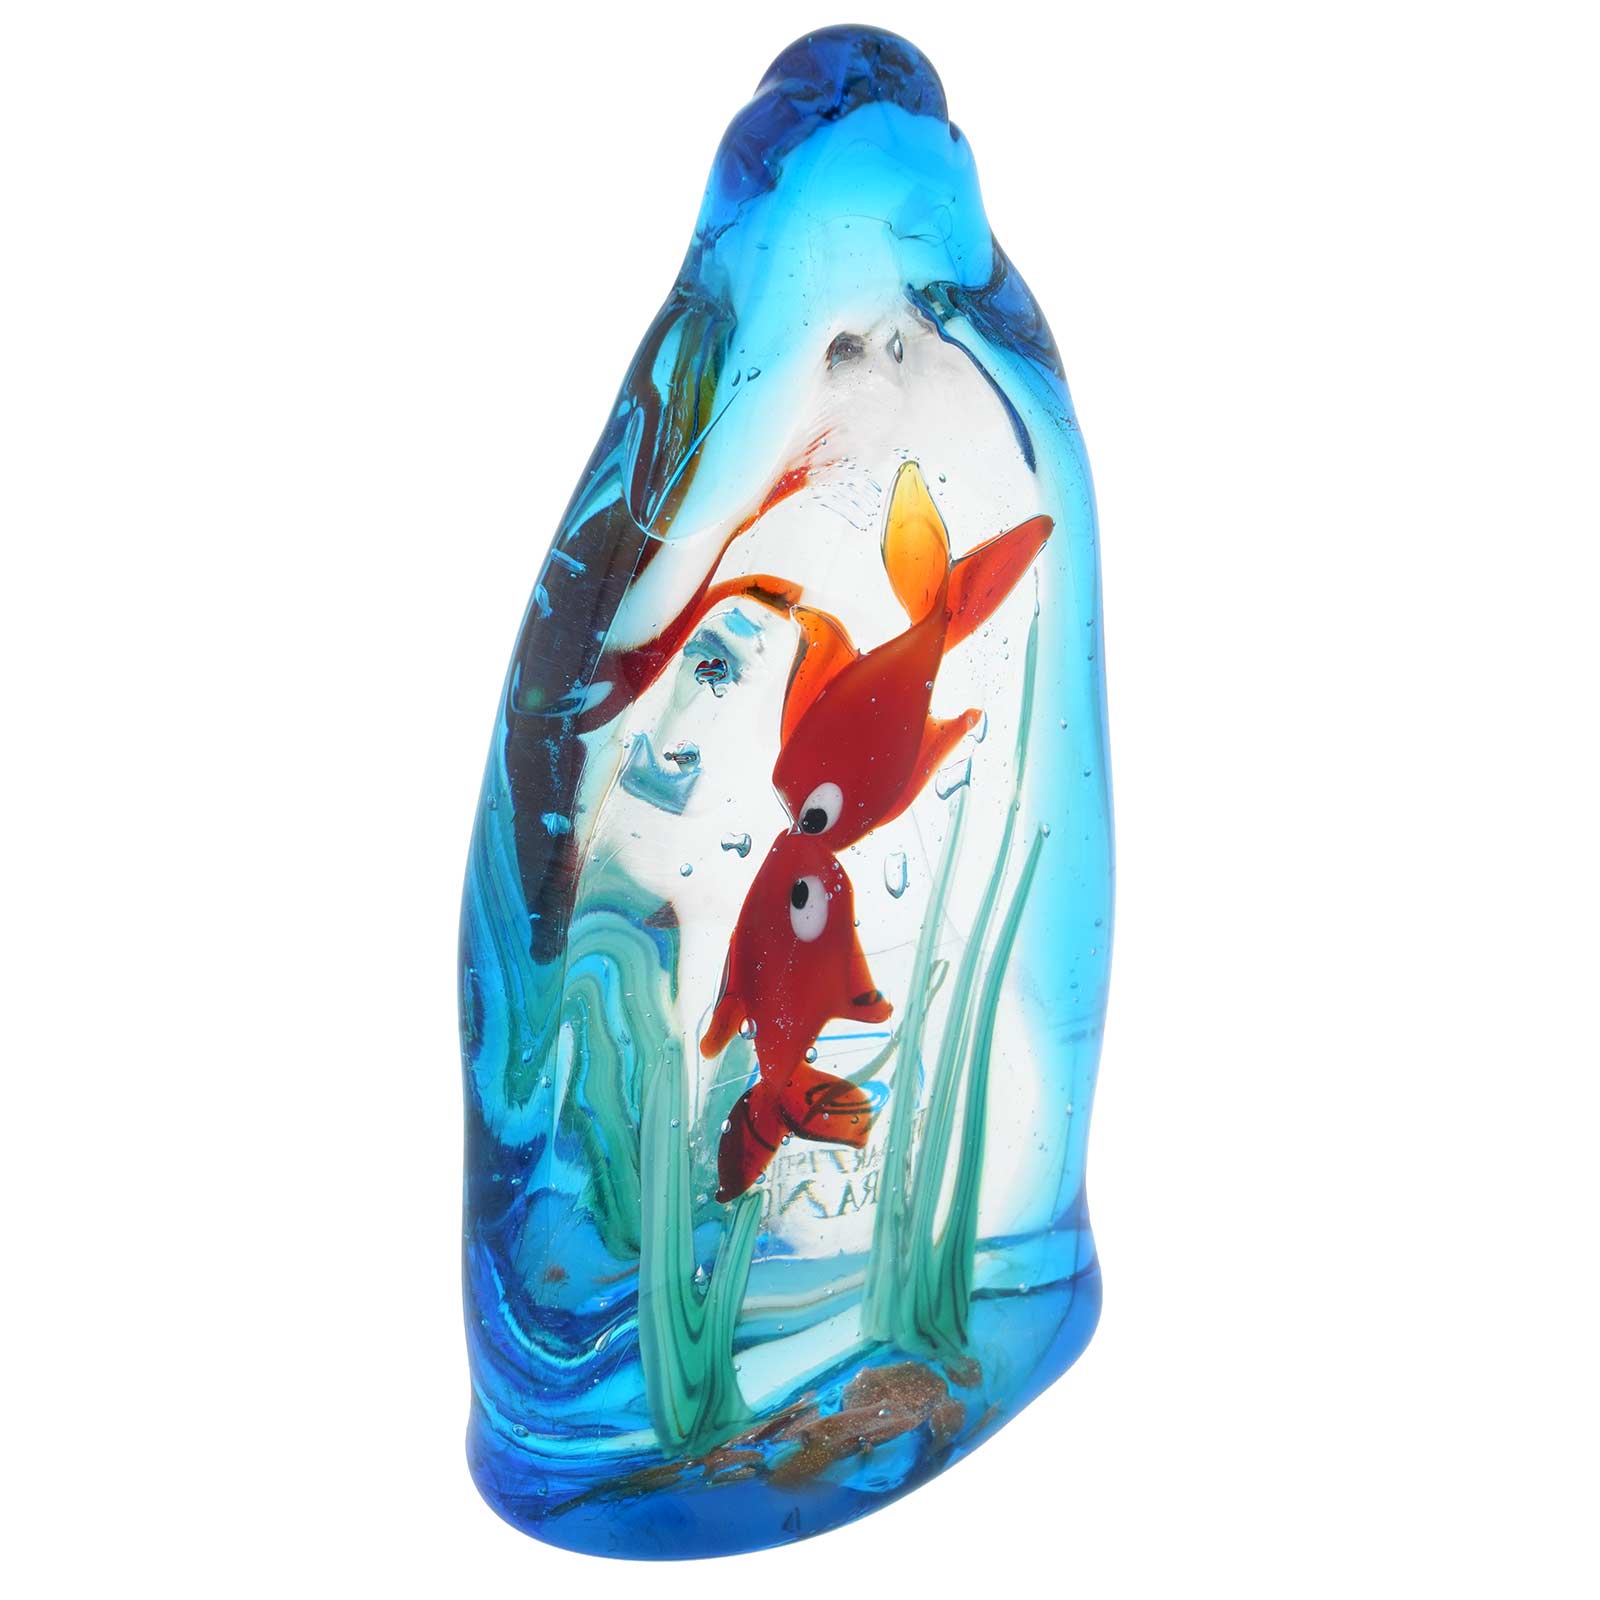 Murano Glass Aquarium With Two Tropical Fish - 4 inches